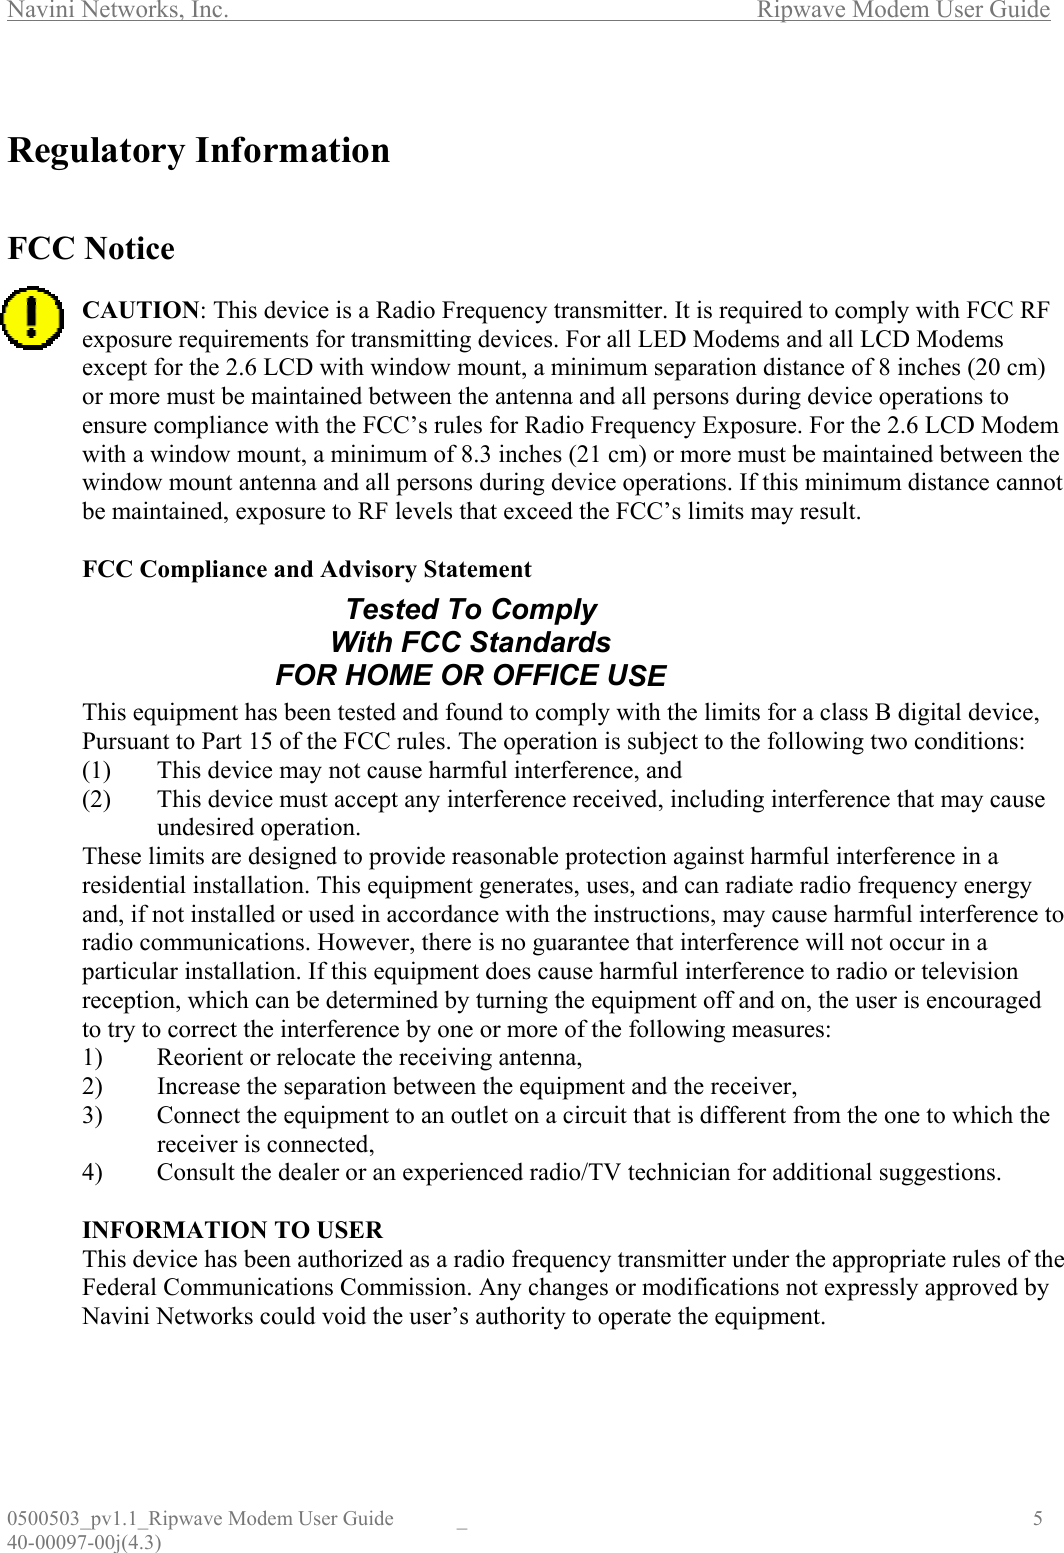 Navini Networks, Inc.        Ripwave Modem User Guide 0500503_pv1.1_Ripwave Modem User Guide  _                                    5 40-00097-00j(4.3)  Regulatory Information   FCC Notice  CAUTION: This device is a Radio Frequency transmitter. It is required to comply with FCC RF exposure requirements for transmitting devices. For all LED Modems and all LCD Modems except for the 2.6 LCD with window mount, a minimum separation distance of 8 inches (20 cm) or more must be maintained between the antenna and all persons during device operations to ensure compliance with the FCC’s rules for Radio Frequency Exposure. For the 2.6 LCD Modem with a window mount, a minimum of 8.3 inches (21 cm) or more must be maintained between the window mount antenna and all persons during device operations. If this minimum distance cannot be maintained, exposure to RF levels that exceed the FCC’s limits may result.   FCC Compliance and Advisory Statement       This equipment has been tested and found to comply with the limits for a class B digital device, Pursuant to Part 15 of the FCC rules. The operation is subject to the following two conditions: (1)  This device may not cause harmful interference, and (2)  This device must accept any interference received, including interference that may cause undesired operation. These limits are designed to provide reasonable protection against harmful interference in a residential installation. This equipment generates, uses, and can radiate radio frequency energy and, if not installed or used in accordance with the instructions, may cause harmful interference to radio communications. However, there is no guarantee that interference will not occur in a particular installation. If this equipment does cause harmful interference to radio or television reception, which can be determined by turning the equipment off and on, the user is encouraged to try to correct the interference by one or more of the following measures: 1)  Reorient or relocate the receiving antenna, 2)  Increase the separation between the equipment and the receiver, 3)  Connect the equipment to an outlet on a circuit that is different from the one to which the receiver is connected, 4)  Consult the dealer or an experienced radio/TV technician for additional suggestions.  INFORMATION TO USER This device has been authorized as a radio frequency transmitter under the appropriate rules of the Federal Communications Commission. Any changes or modifications not expressly approved by Navini Networks could void the user’s authority to operate the equipment. Tested To Comply With FCC Standards FOR HOME OR OFFICE USE